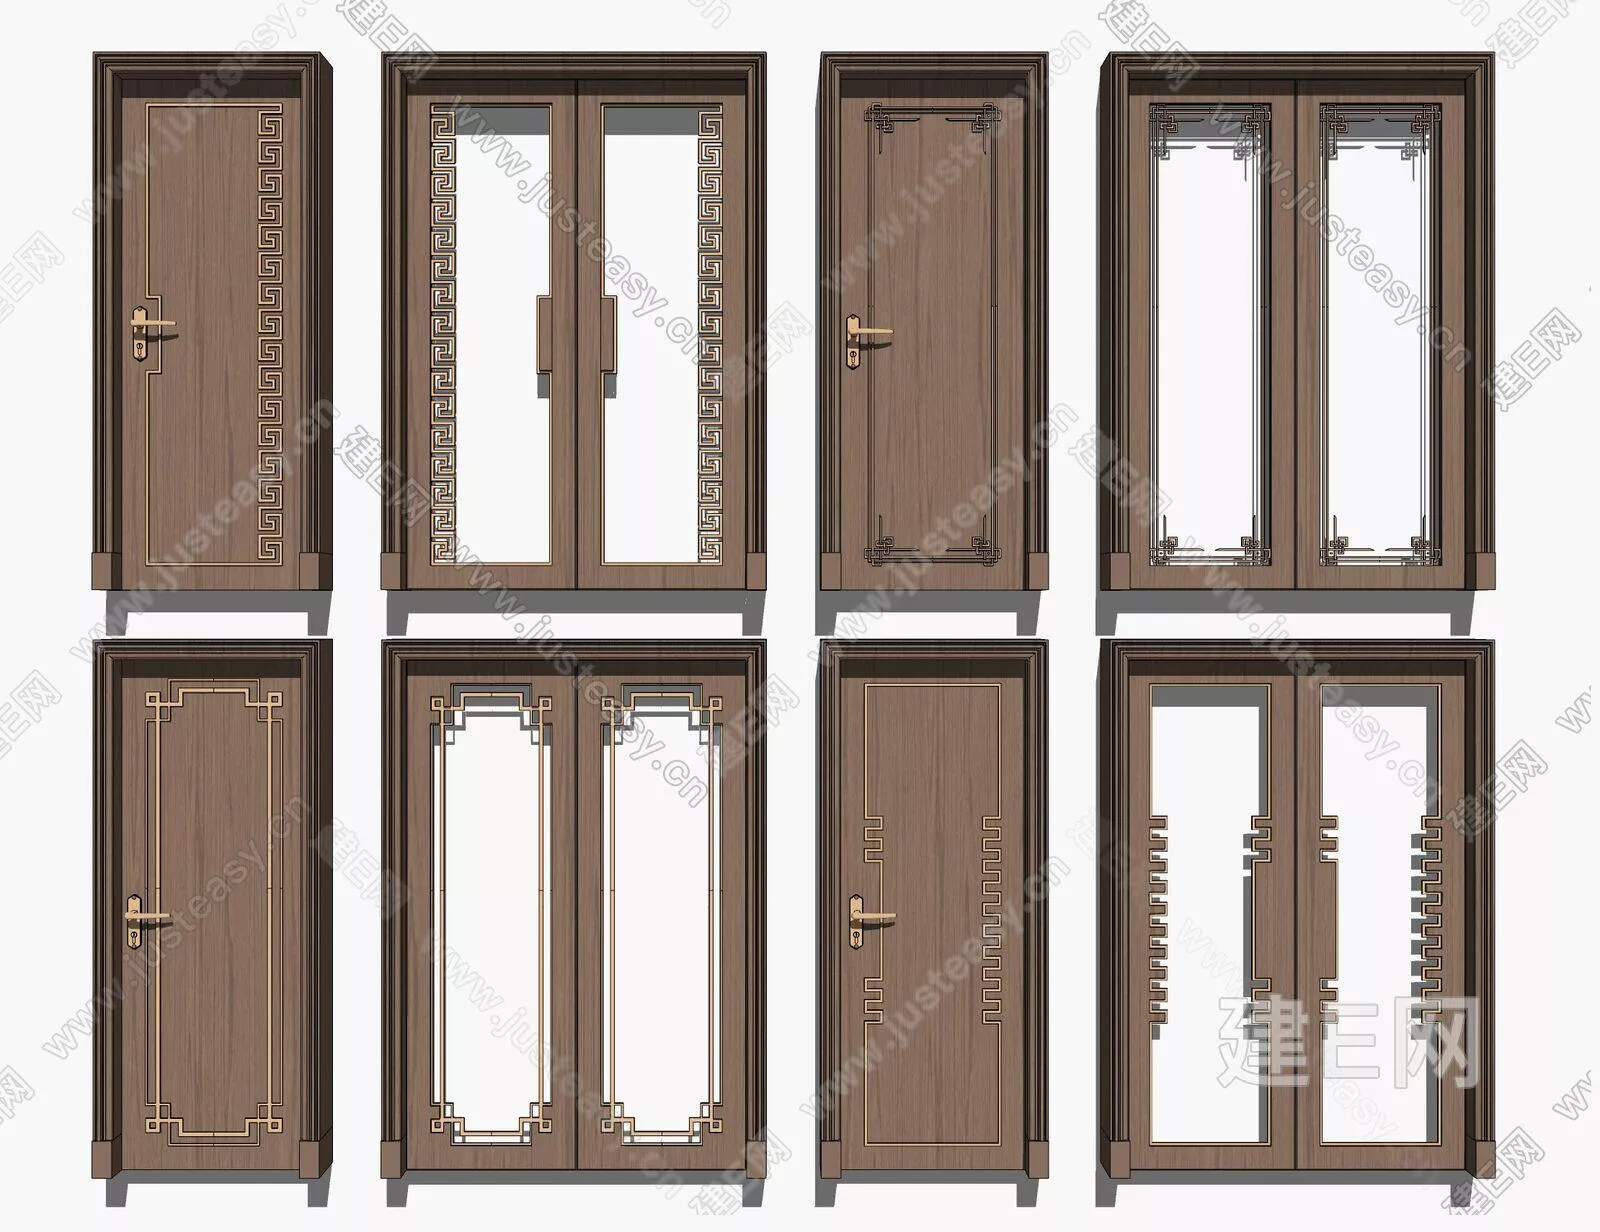 CHINESE DOOR AND WINDOWS - SKETCHUP 3D MODEL - ENSCAPE - 109199542